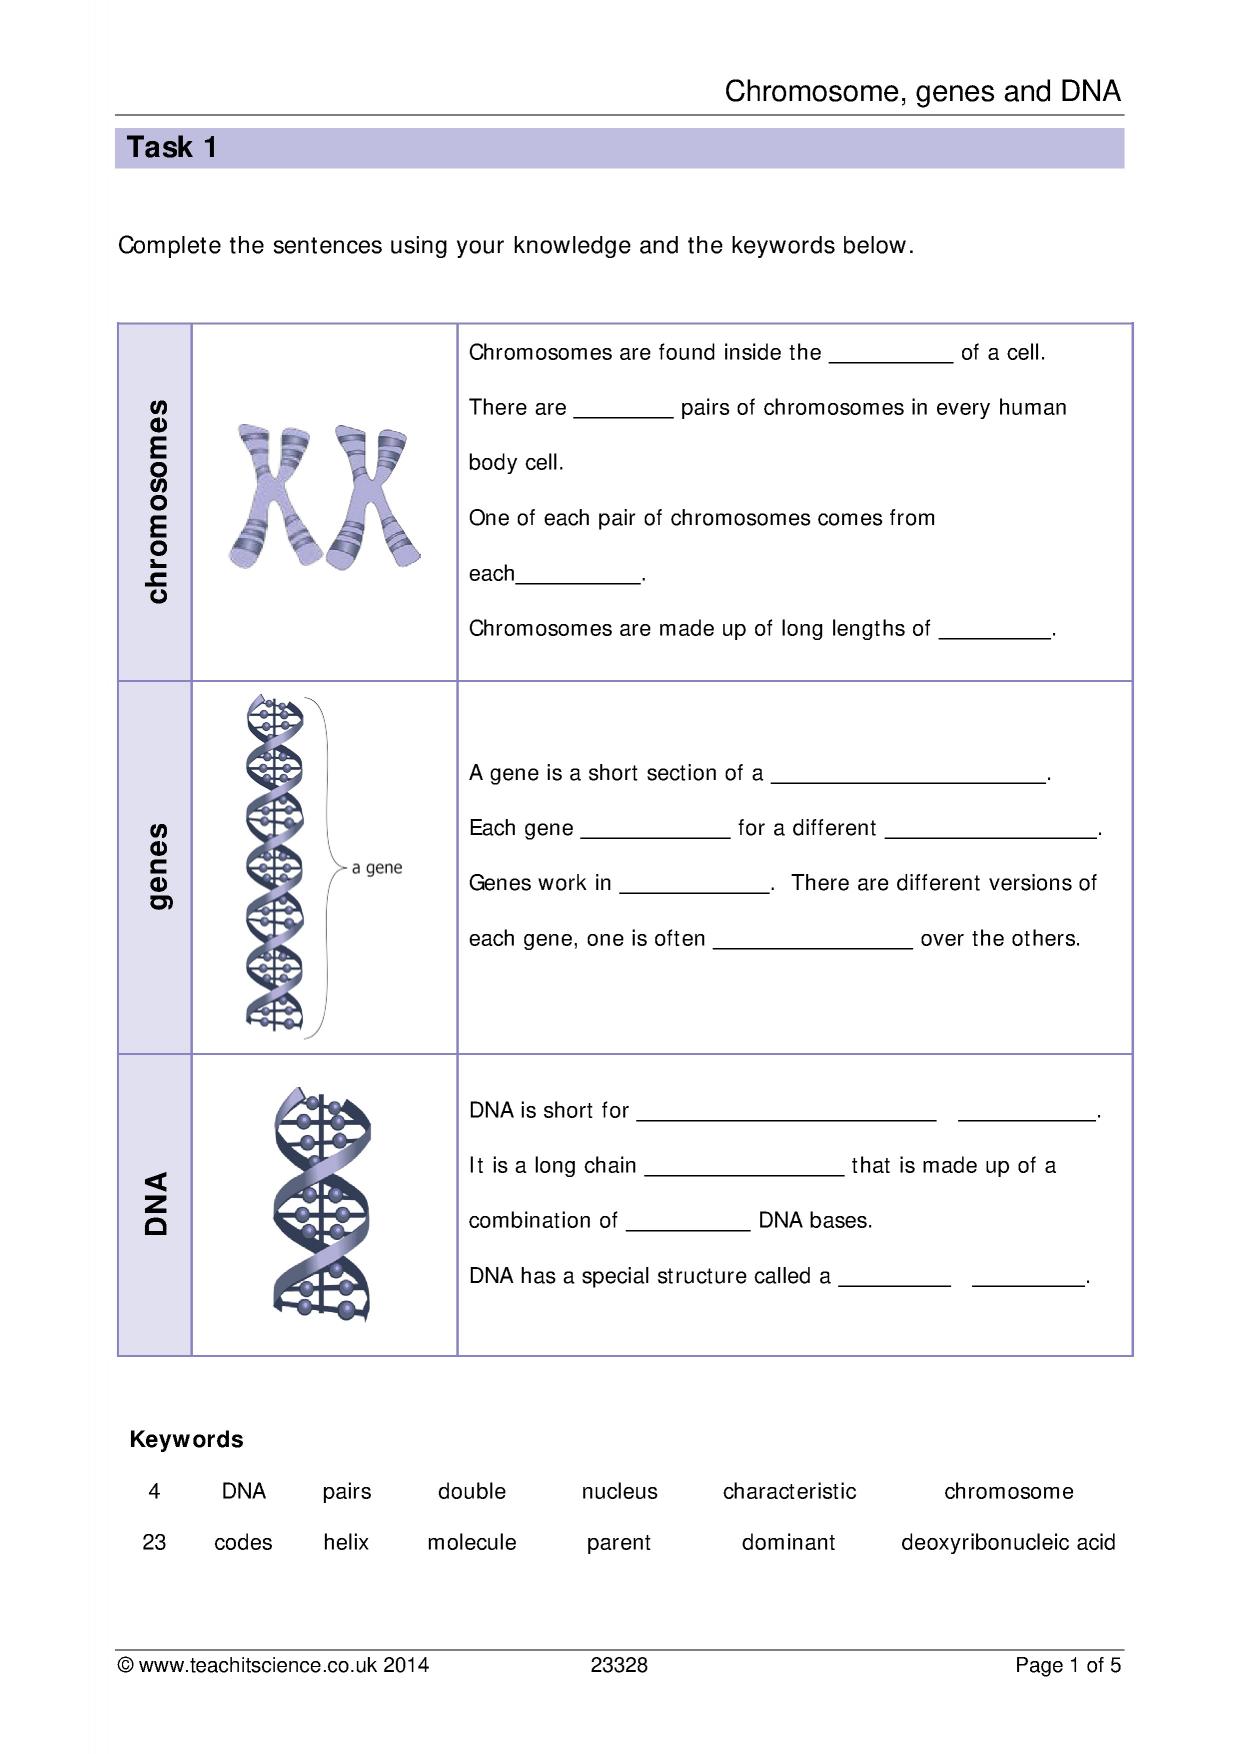 chromosomes-genes-and-dna-worksheet-with-answers